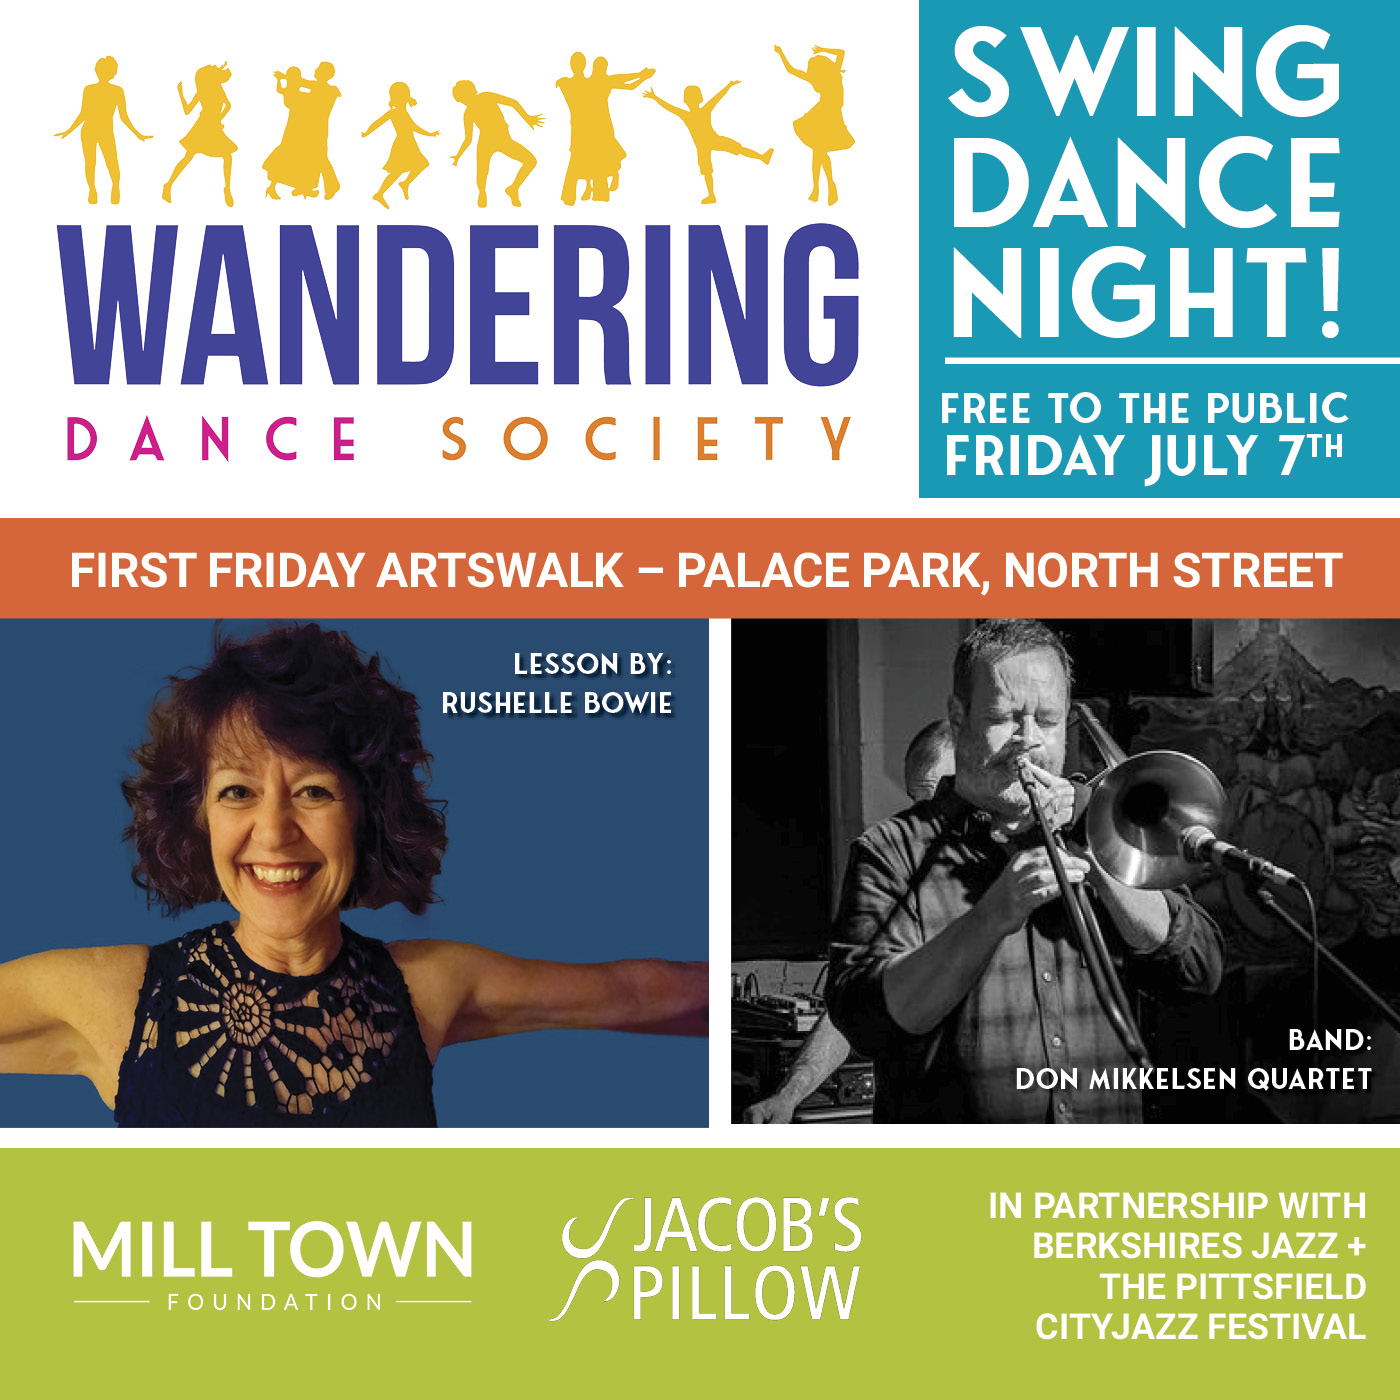 Live Jazz and Swing Dance Lessons at Palace Park